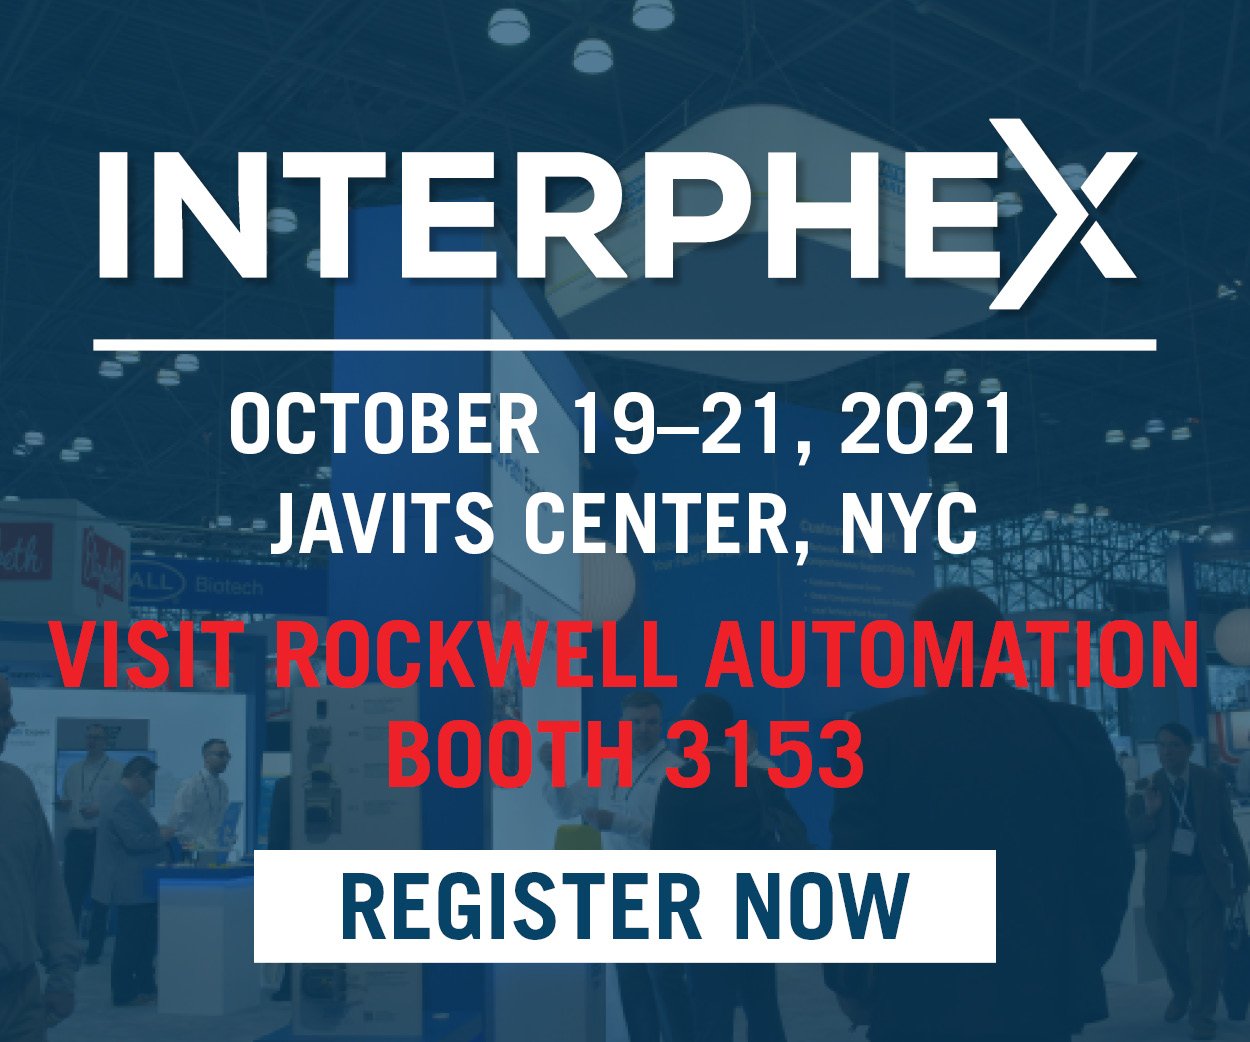 Register for Interphex 2021, October 19-21, Javits Center, NYC, visit Rockwell Automation booth 3153